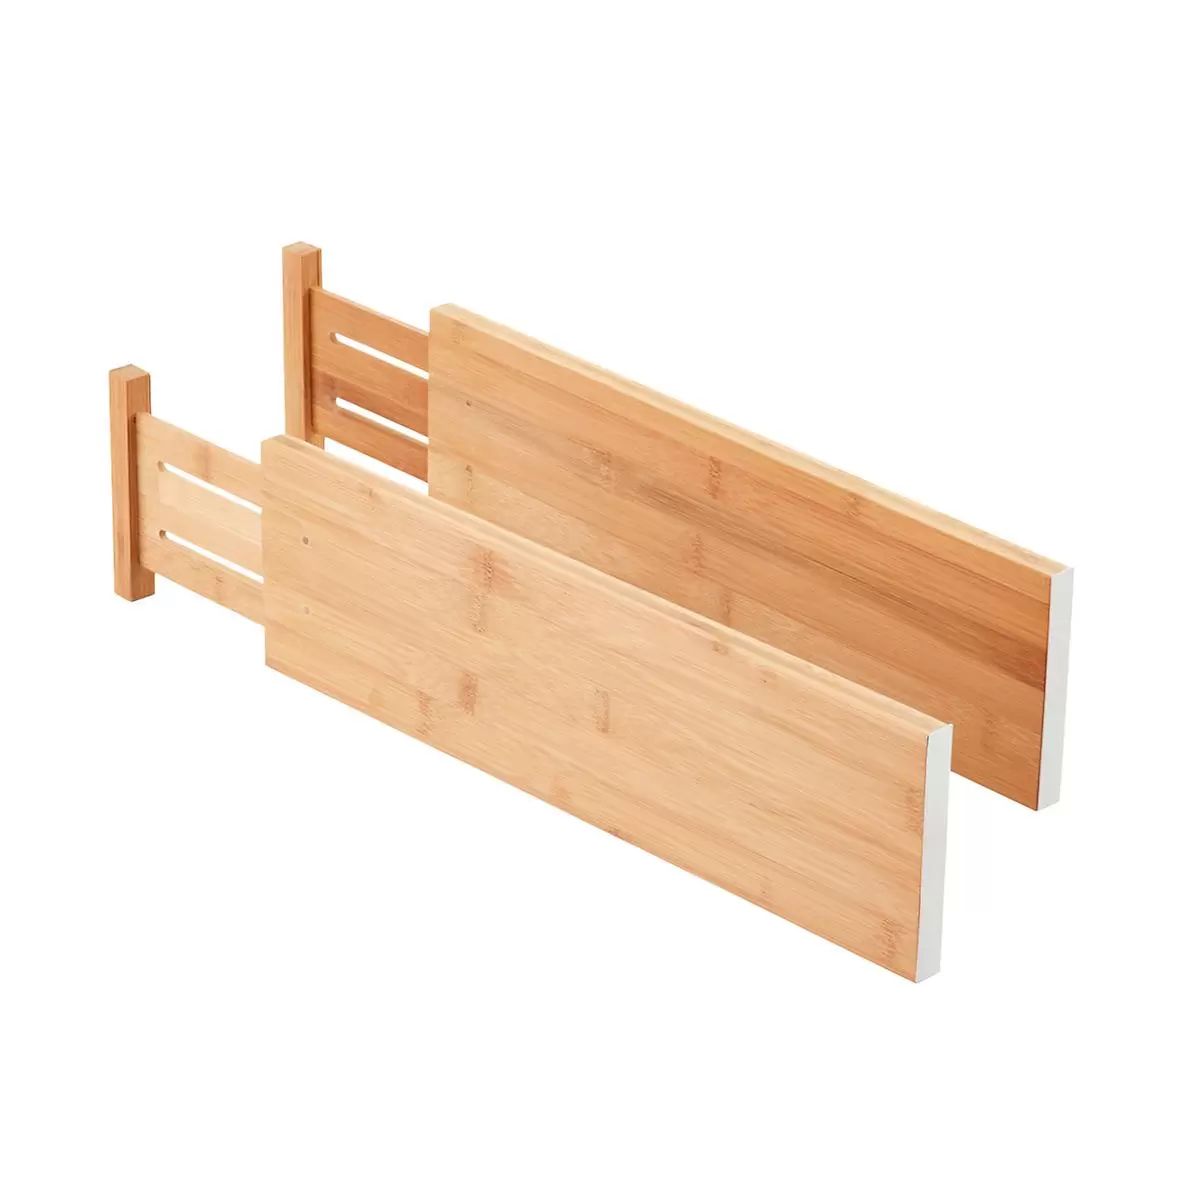 Bamboo Deep Drawer Organizers Pkg/2 | The Container Store